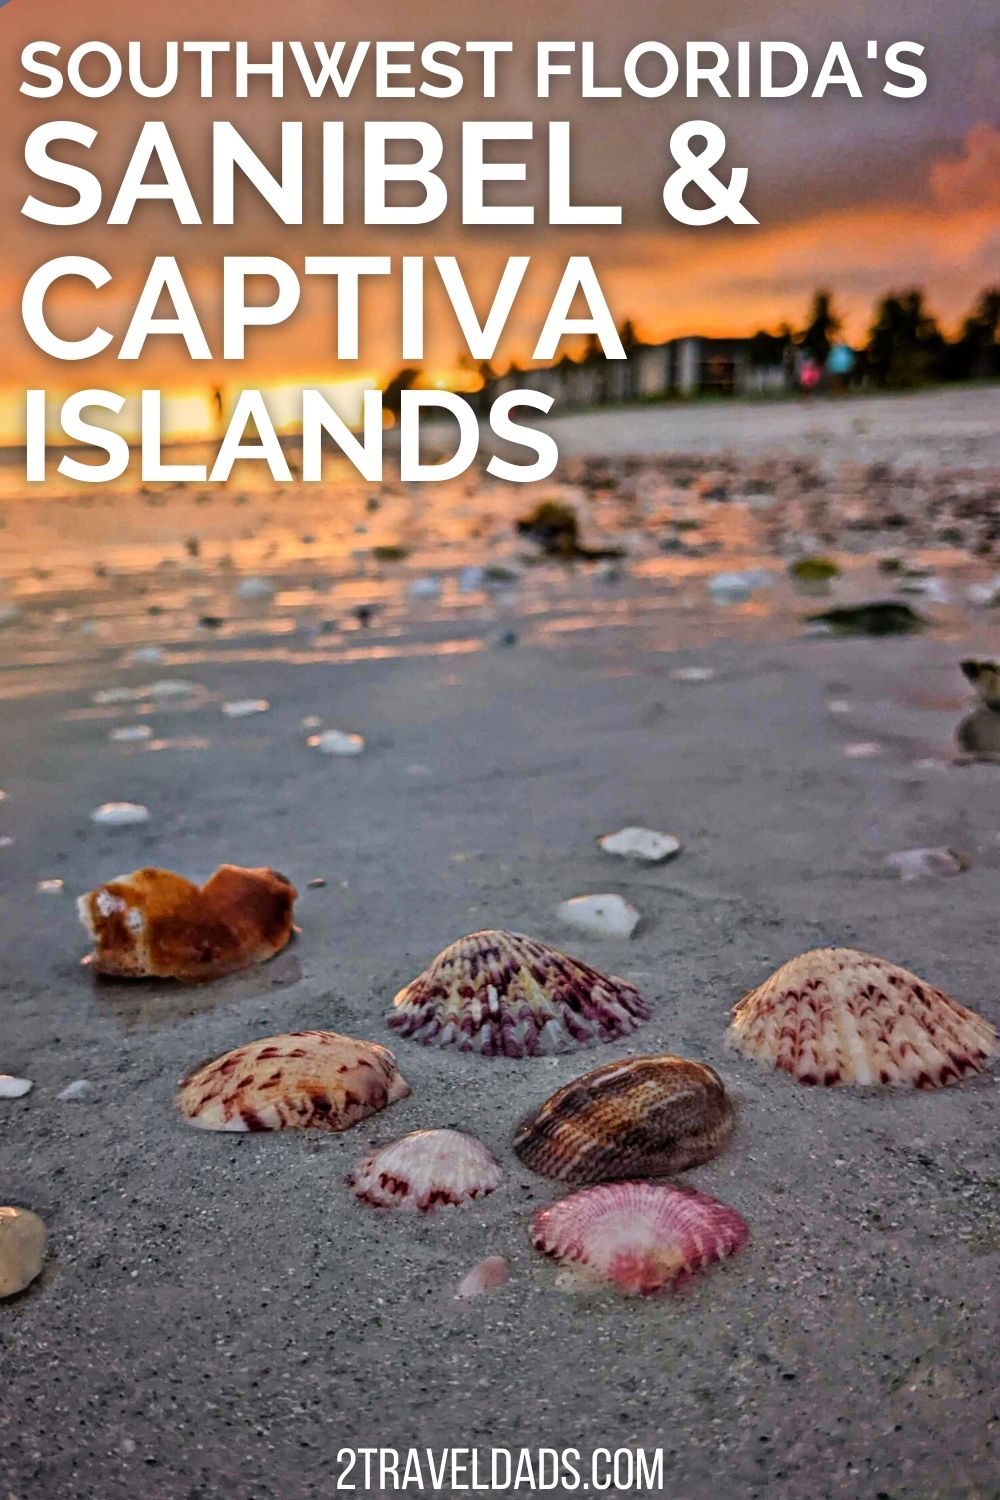 Sanibel and Captiva make for the perfect Southwest Florida vacation destination. With so many things to do, both on the beaches and not, the Seashell Capital of the World is fun, relaxing and a dream Florida escape.